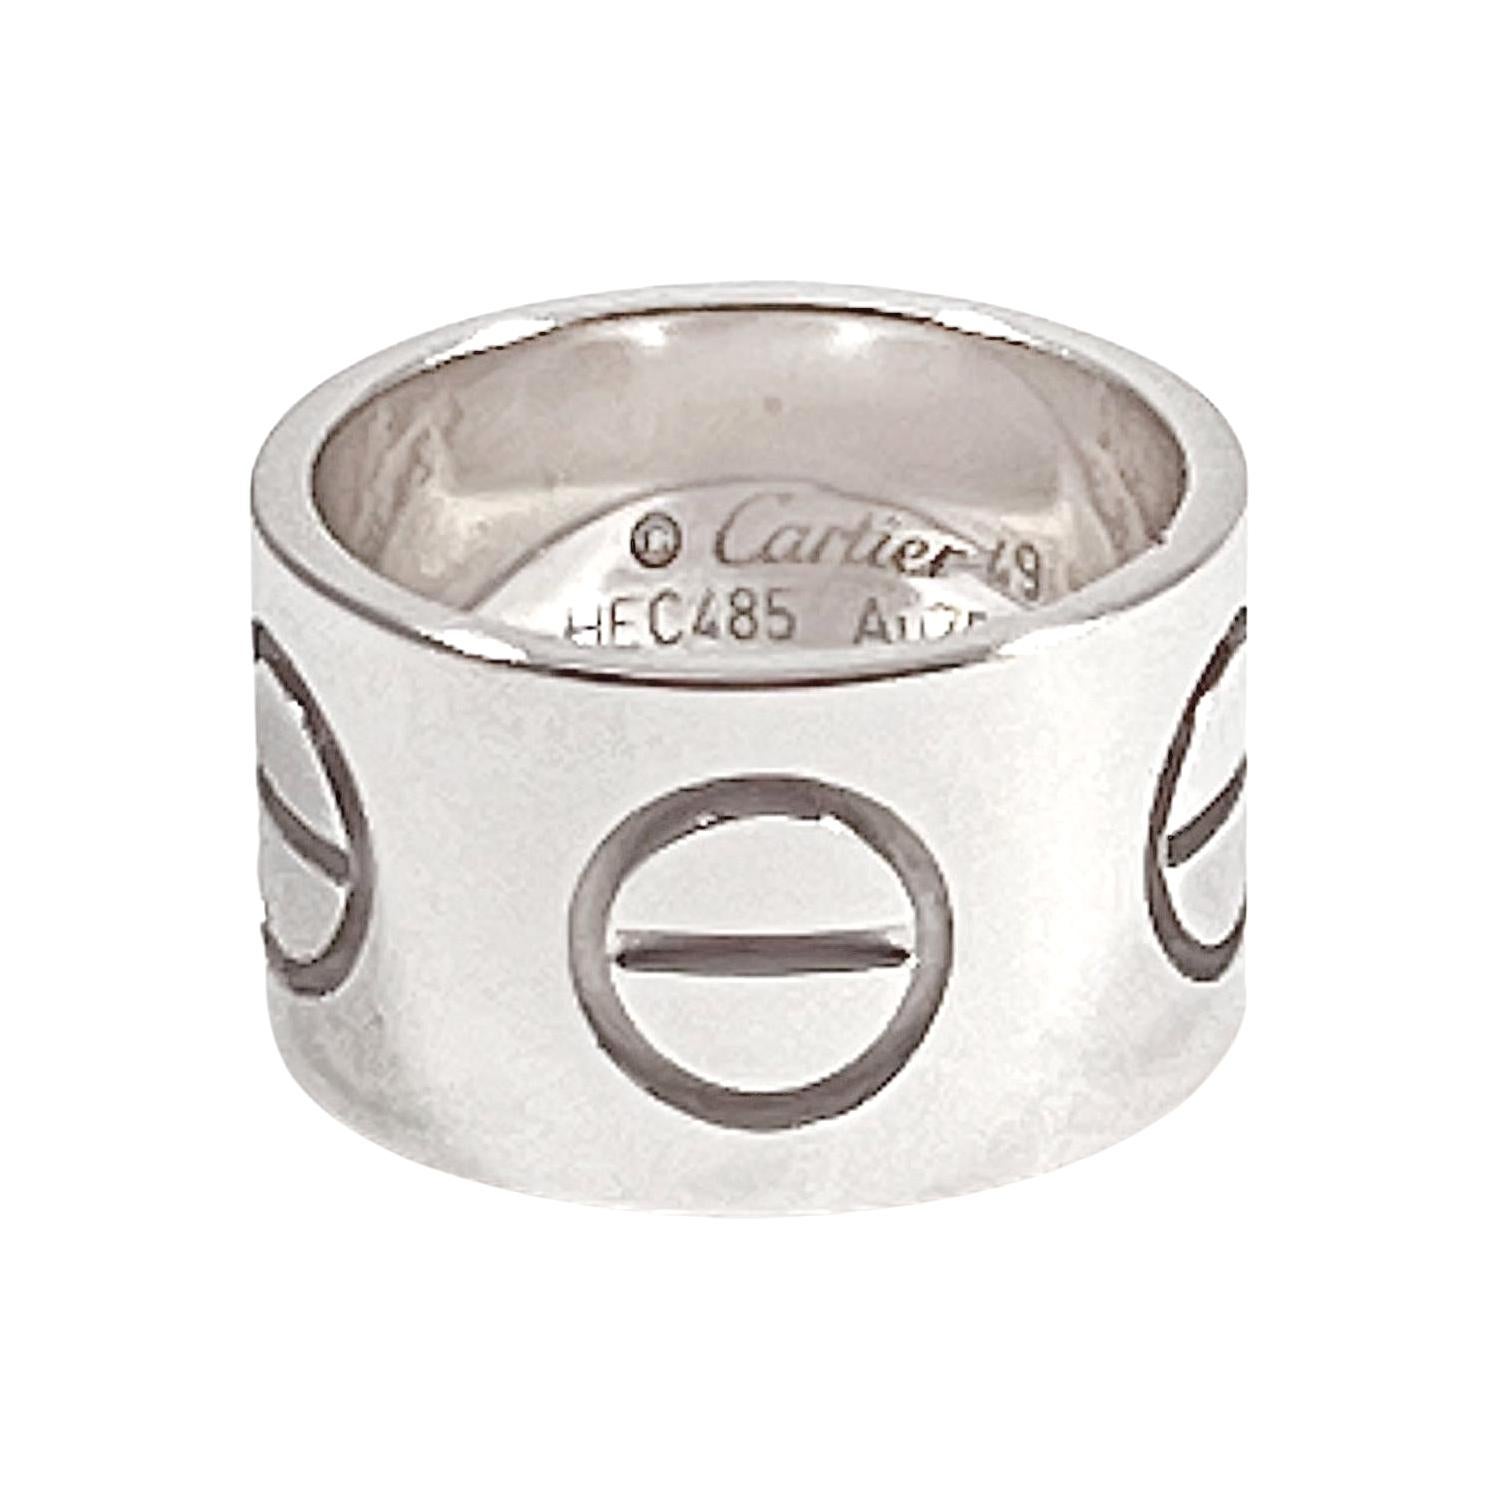 Cartier wide LOVE band ring in polished 18K white gold. Signed '© Cartier 49' serial number and 'AU750' with Cartier French gold mark. 11mm wide. Size 4.75 (European - 49). Includes the original Cartier box inner and outer box, along with the